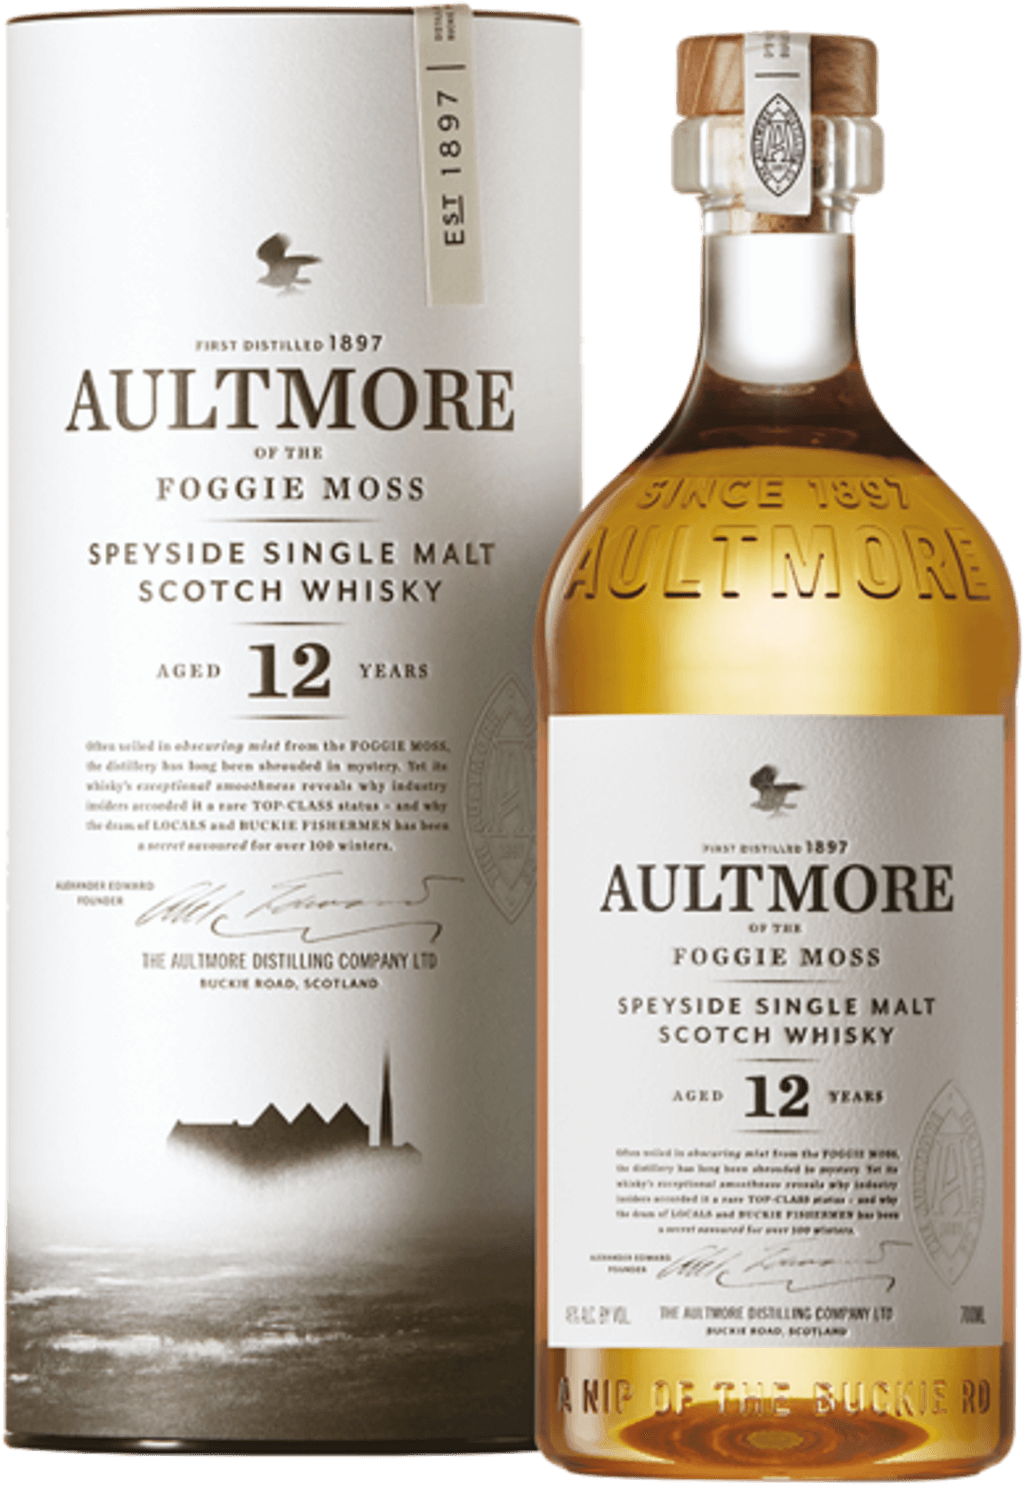 Aultmore 12 Years Old Speyside Single Malt Scotch Whisky (gift box)